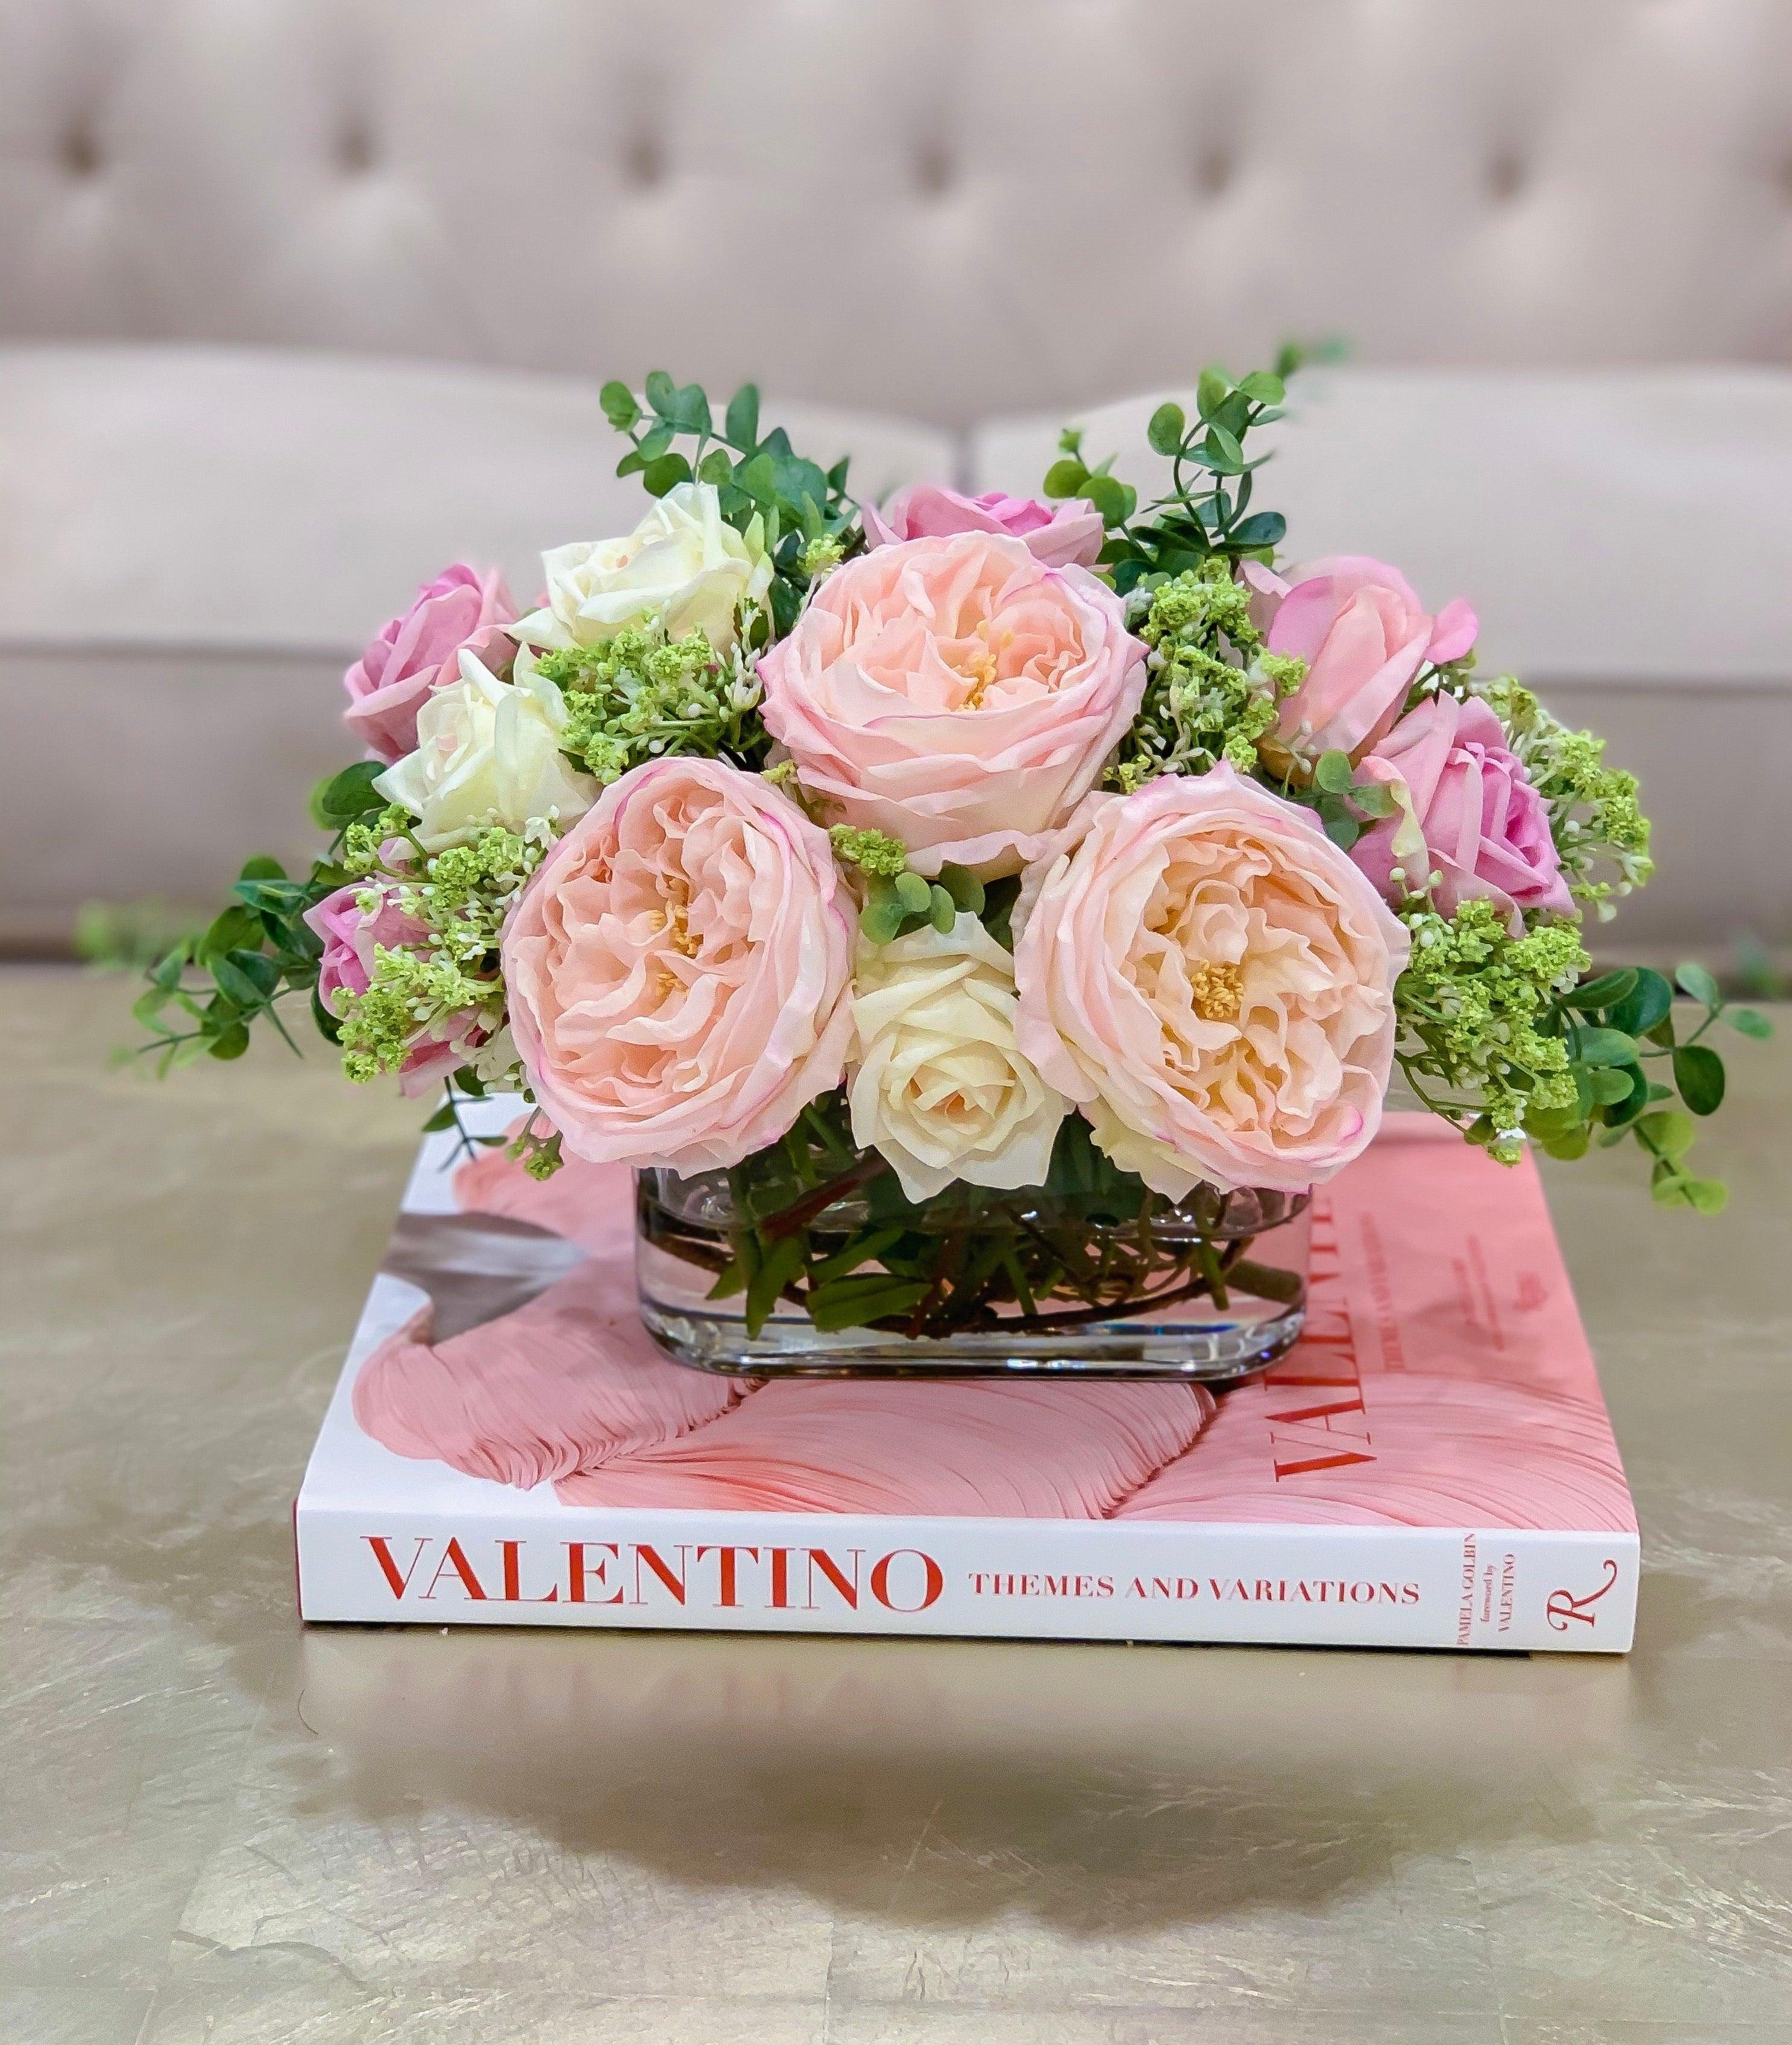 Exclusive Real Touch Pink English Roses Arrangement - Flovery